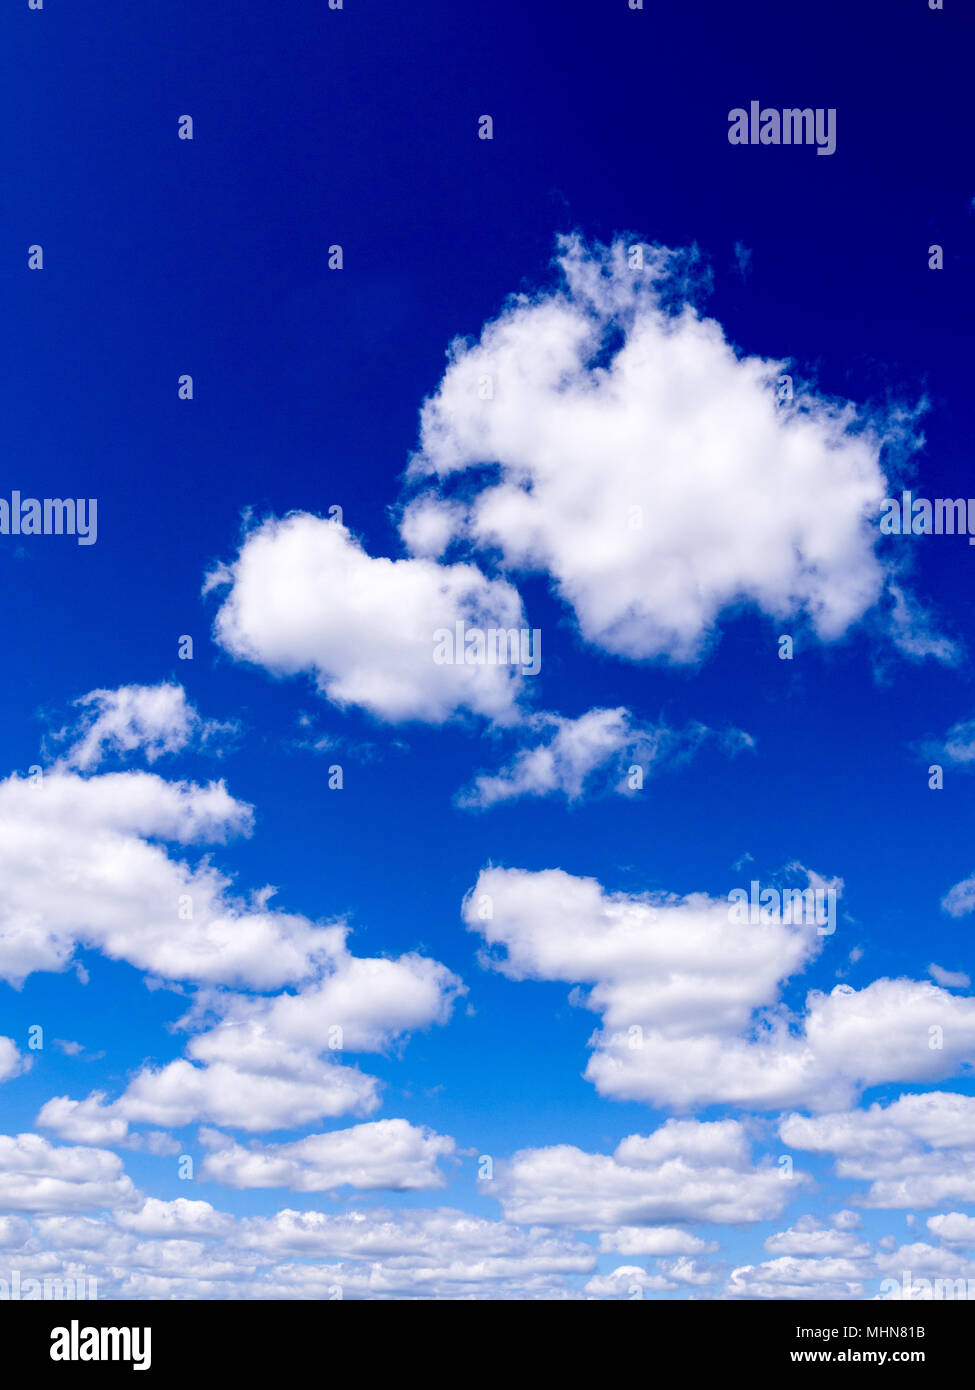 Blue sky with white fluffy clouds Stock Photo